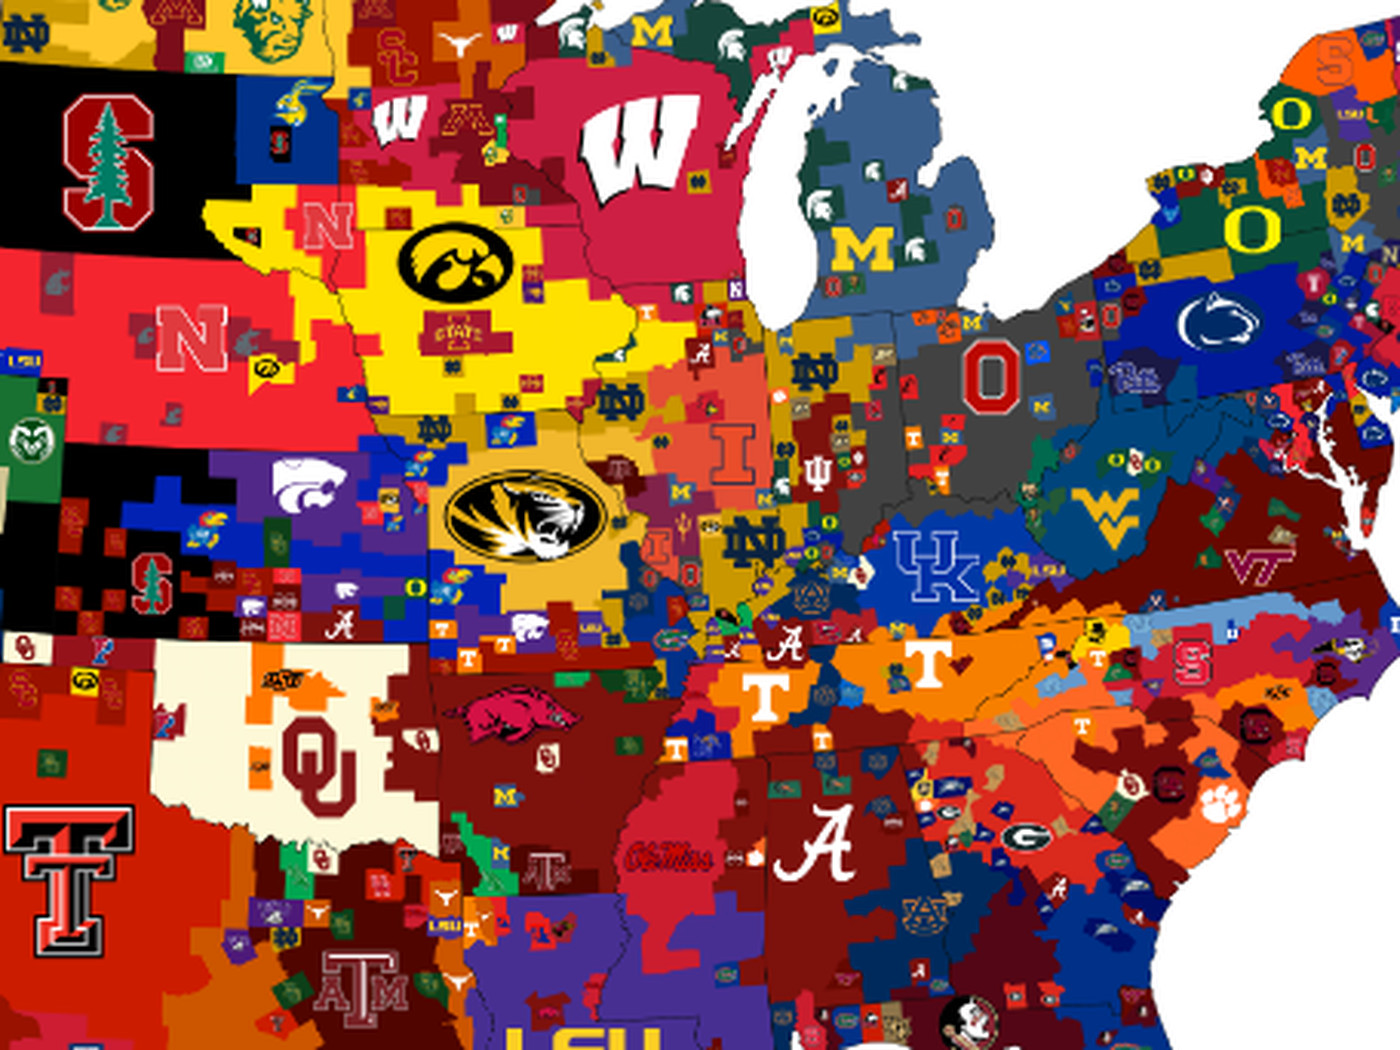 different maps that show the most popular college football teams across America